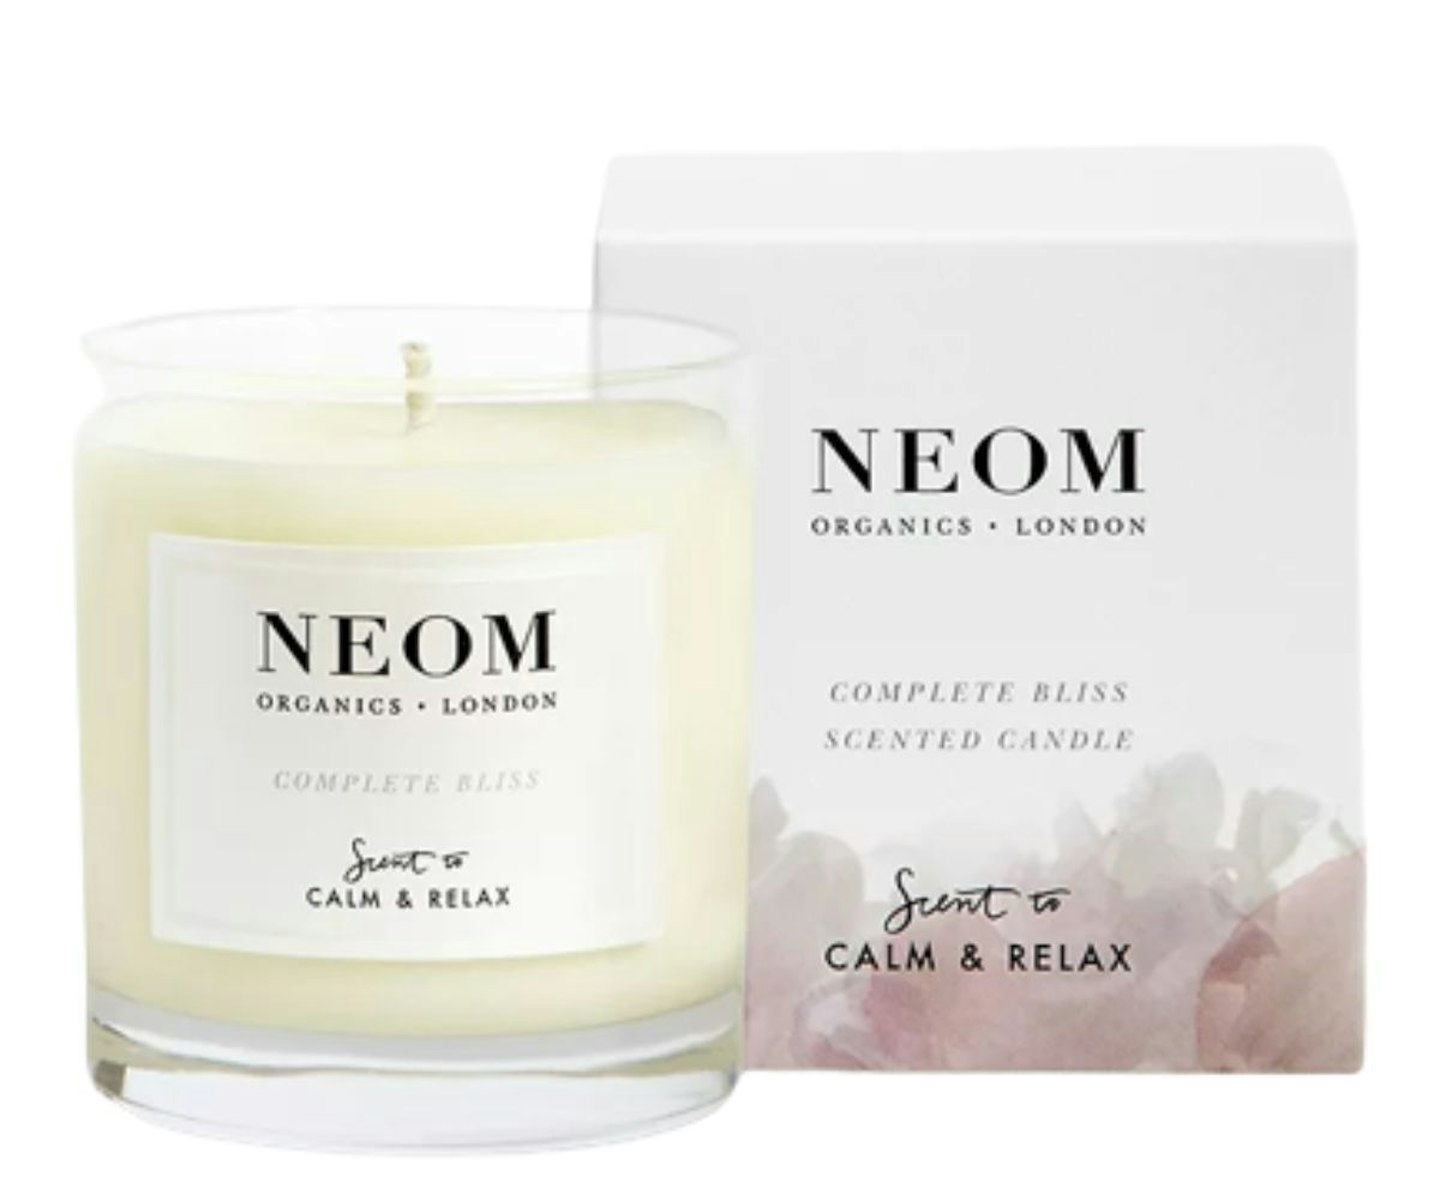 Neom Organics Complete Bliss Scented Candle